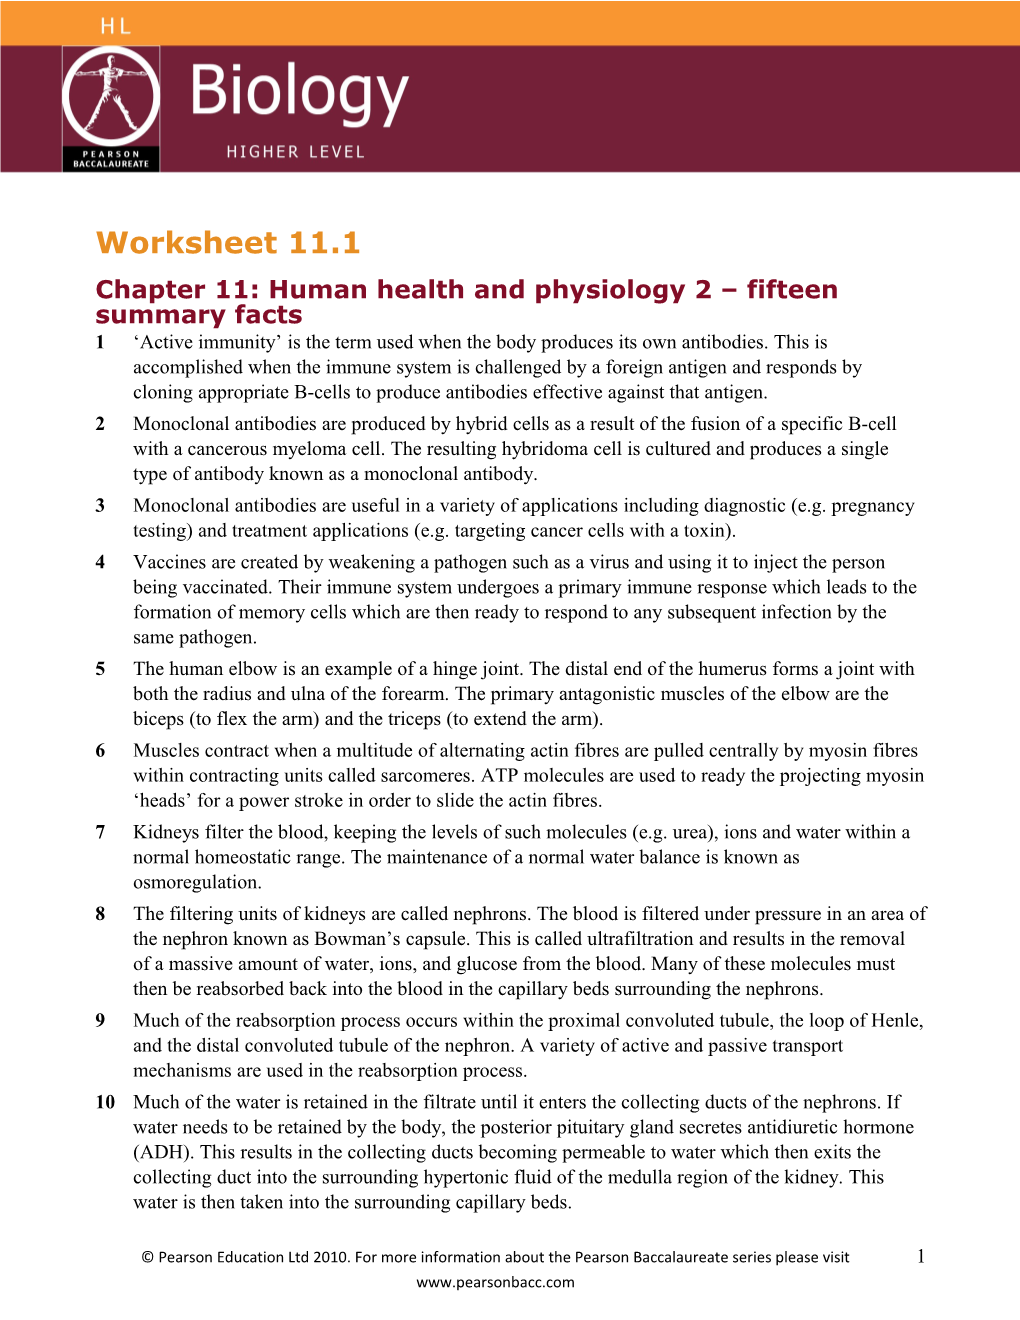 Chapter 11: Human Health and Physiology 2 Fifteen Summary Facts